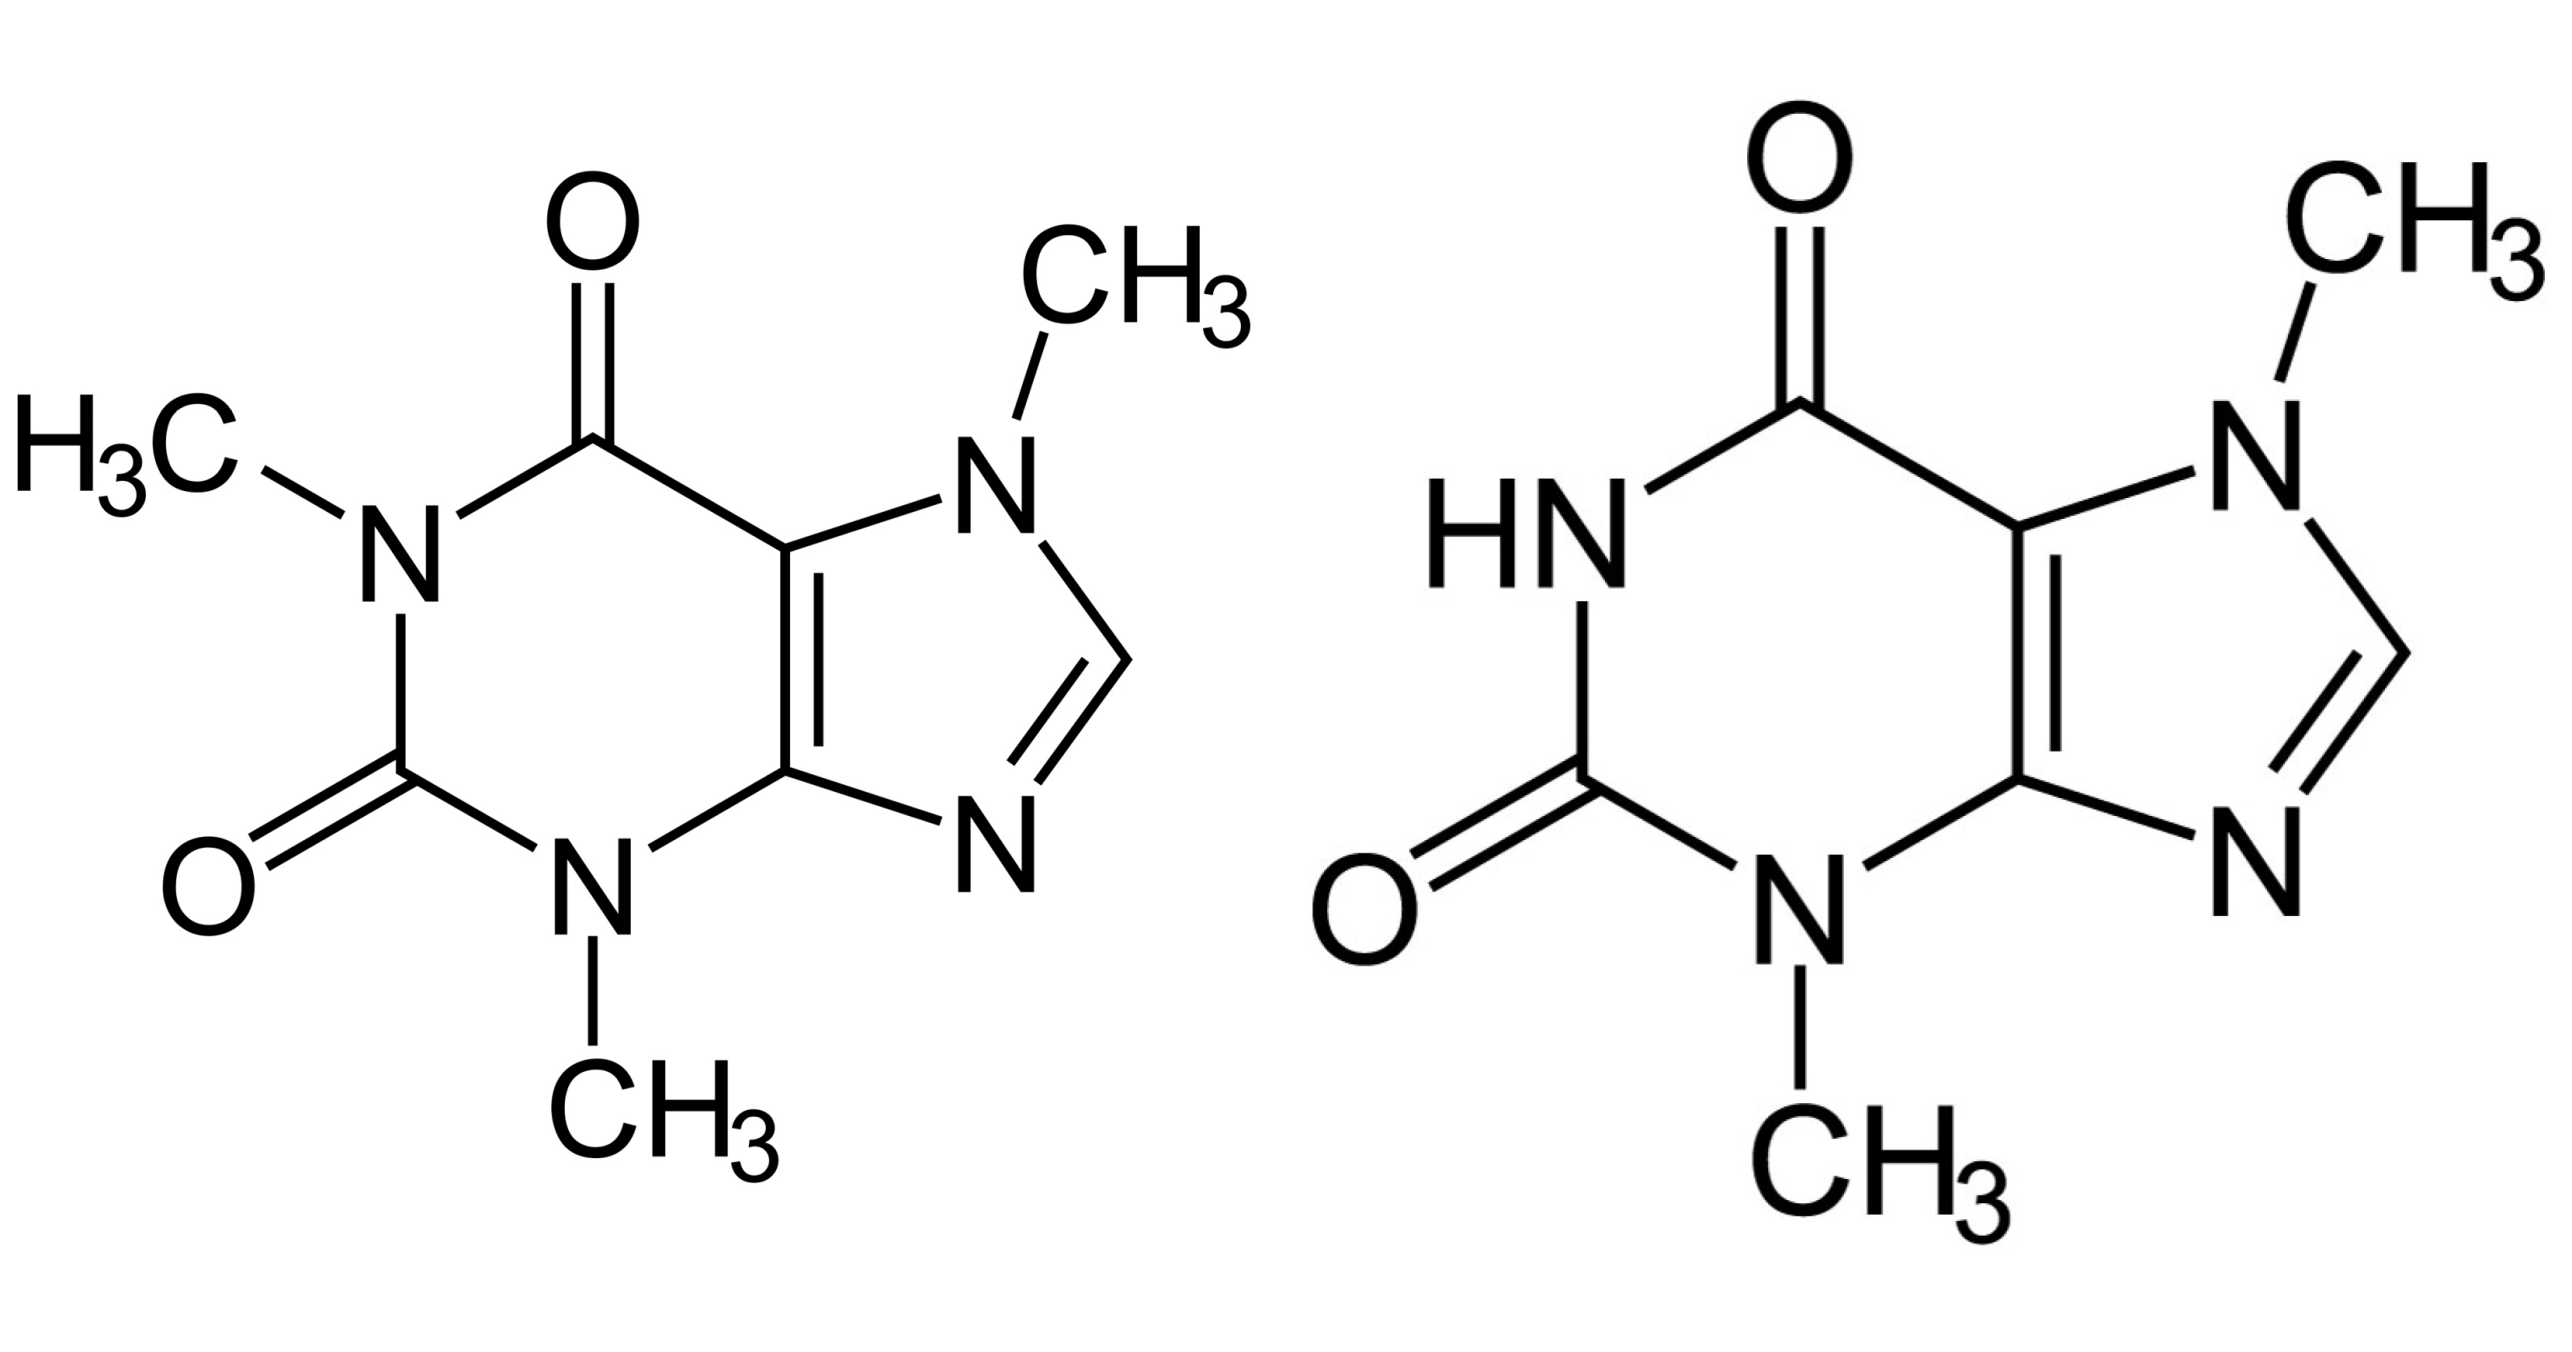 Structural formulas of caffeine (left) and theobromine (right) 